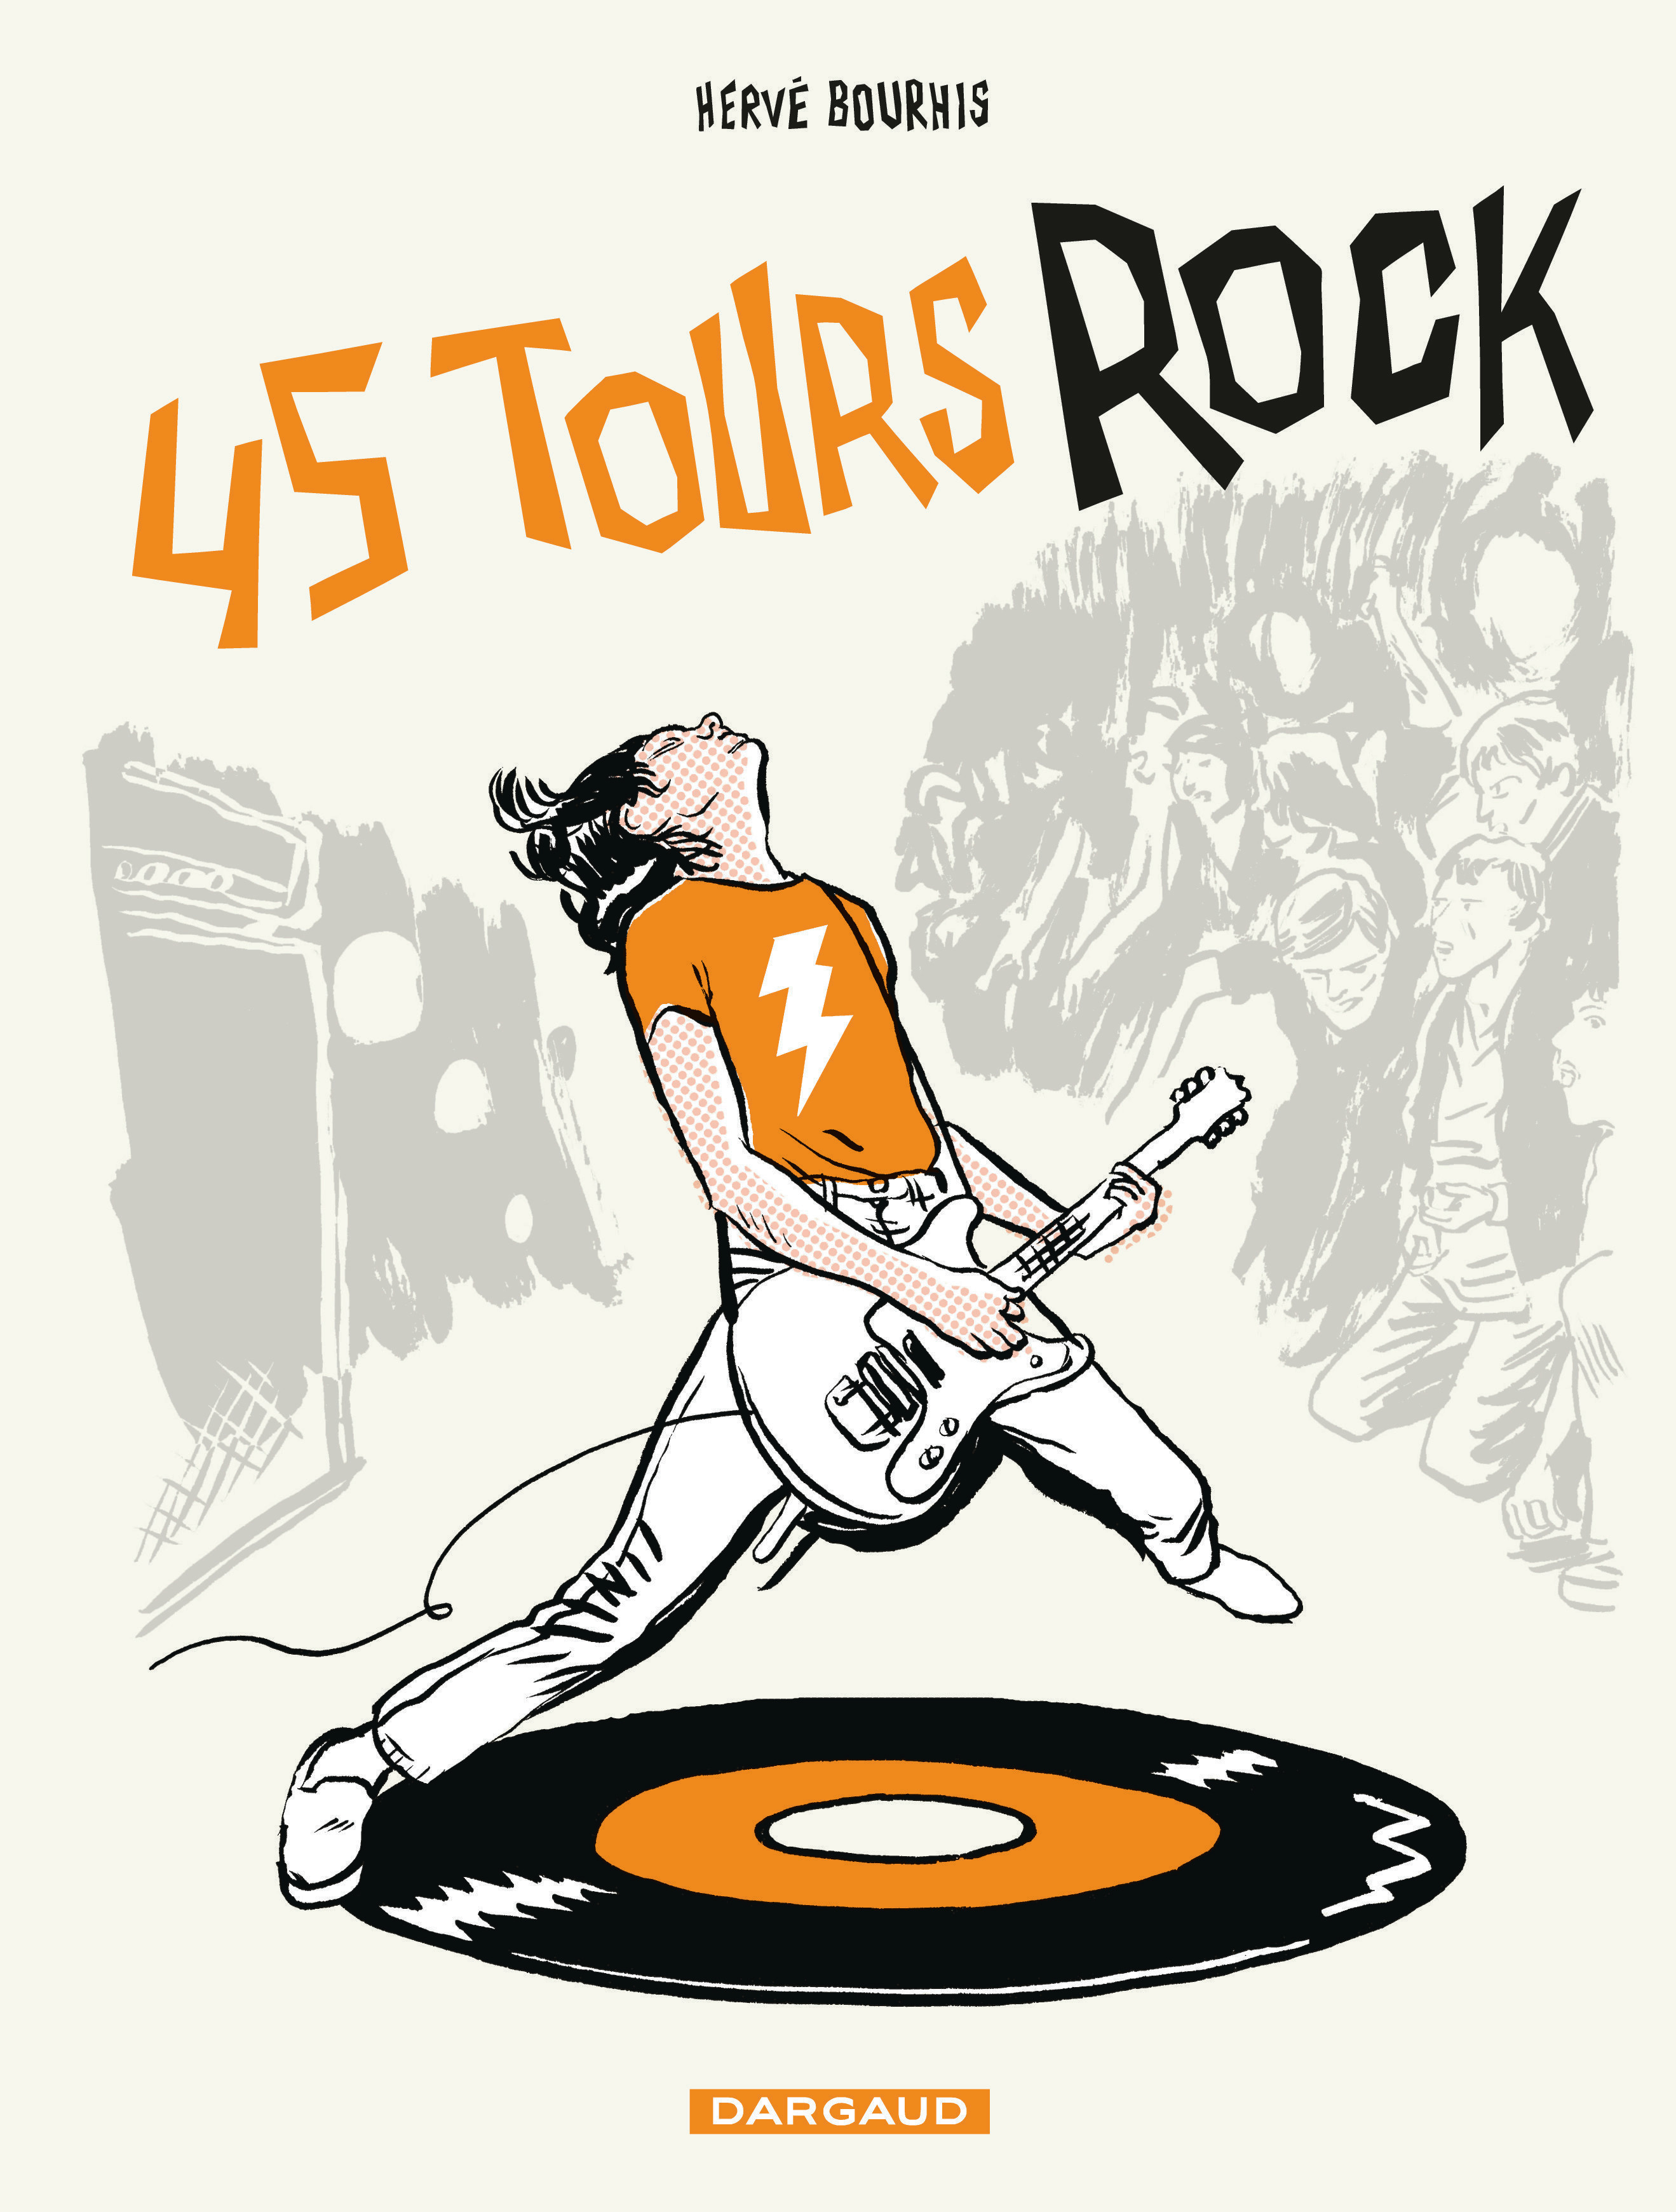 45 Tours Rock - Tome 0 - 45 Tours Rock (9782205070231-front-cover)